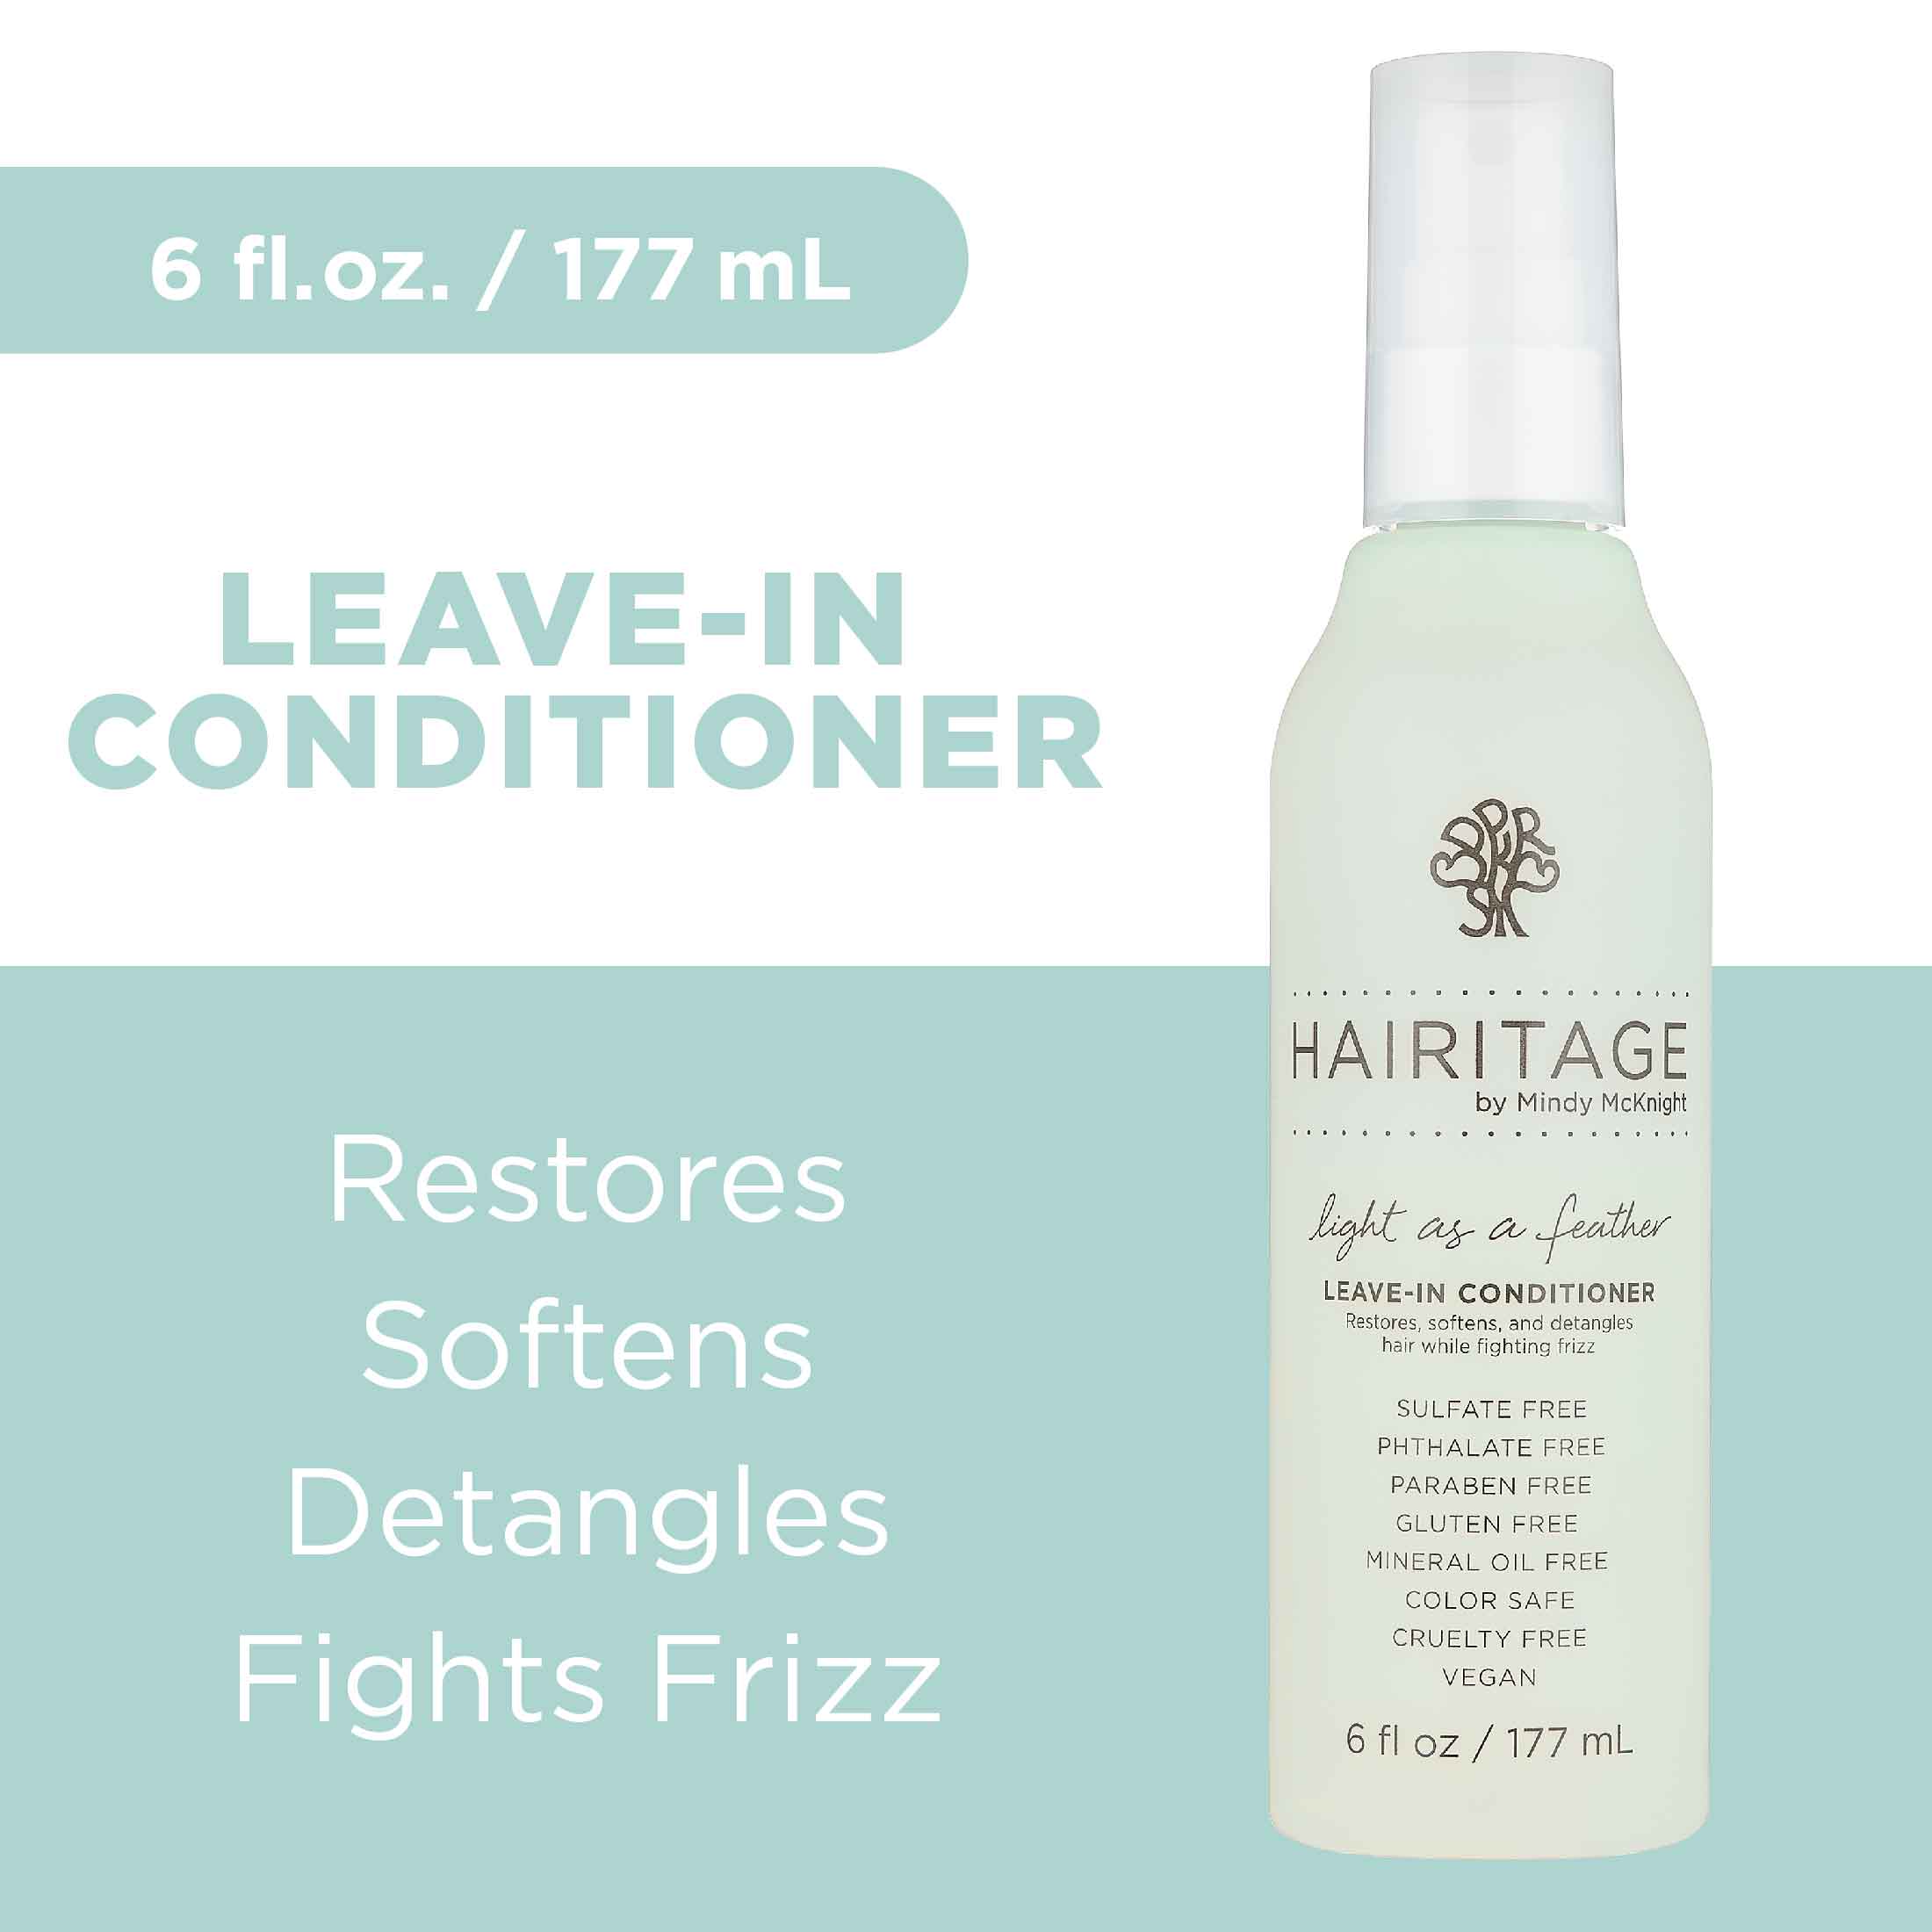 Hairitage Light as a Feather Detangling Leave-in Conditioner Spray, 6 fl oz - image 2 of 8